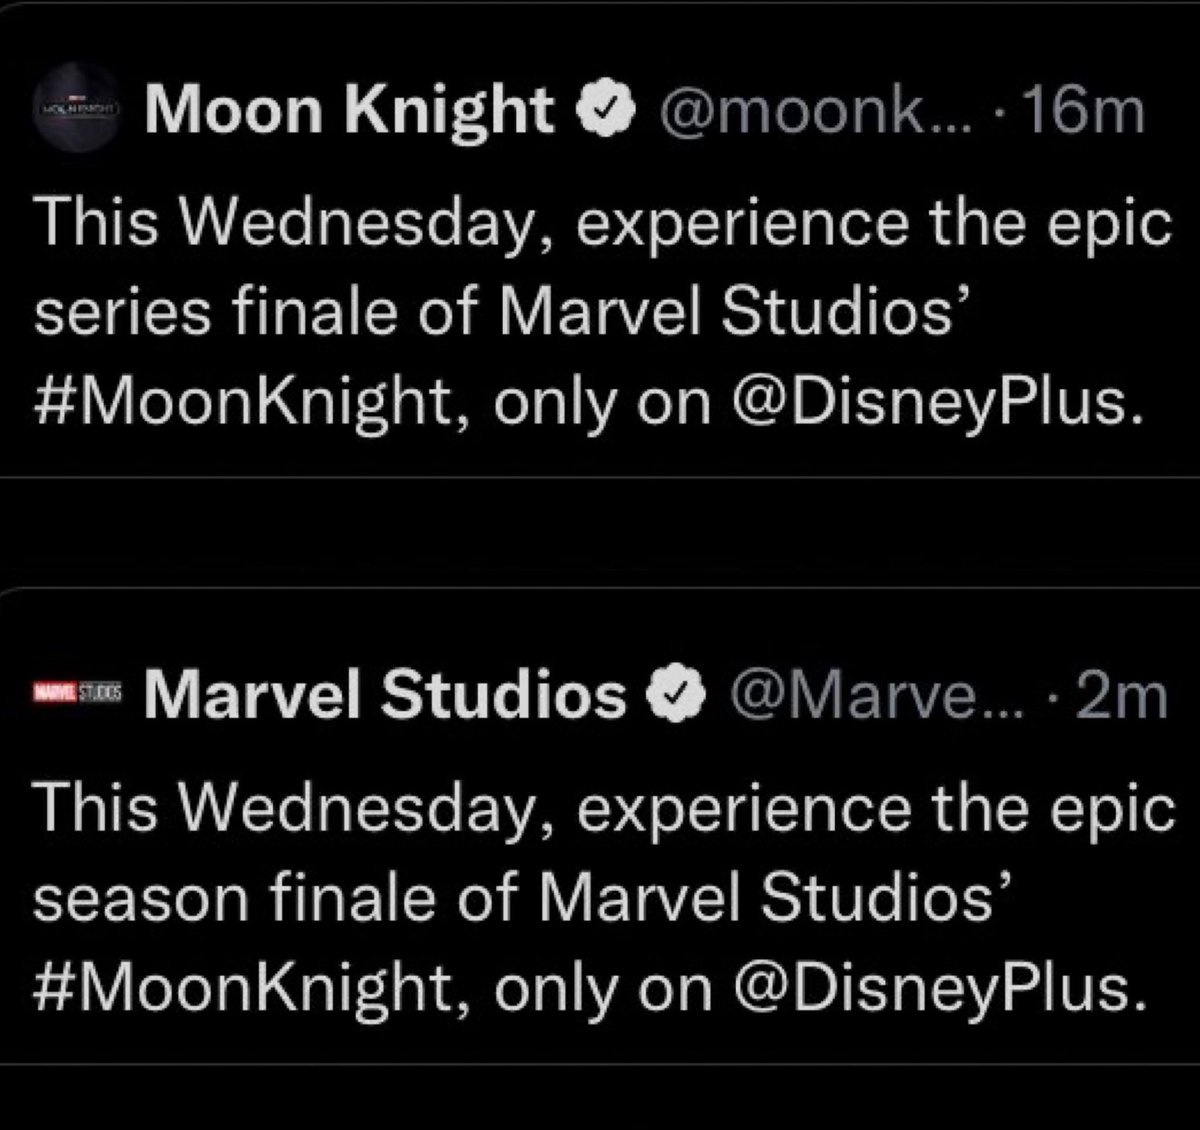 Notice anything different? #MoonKnight